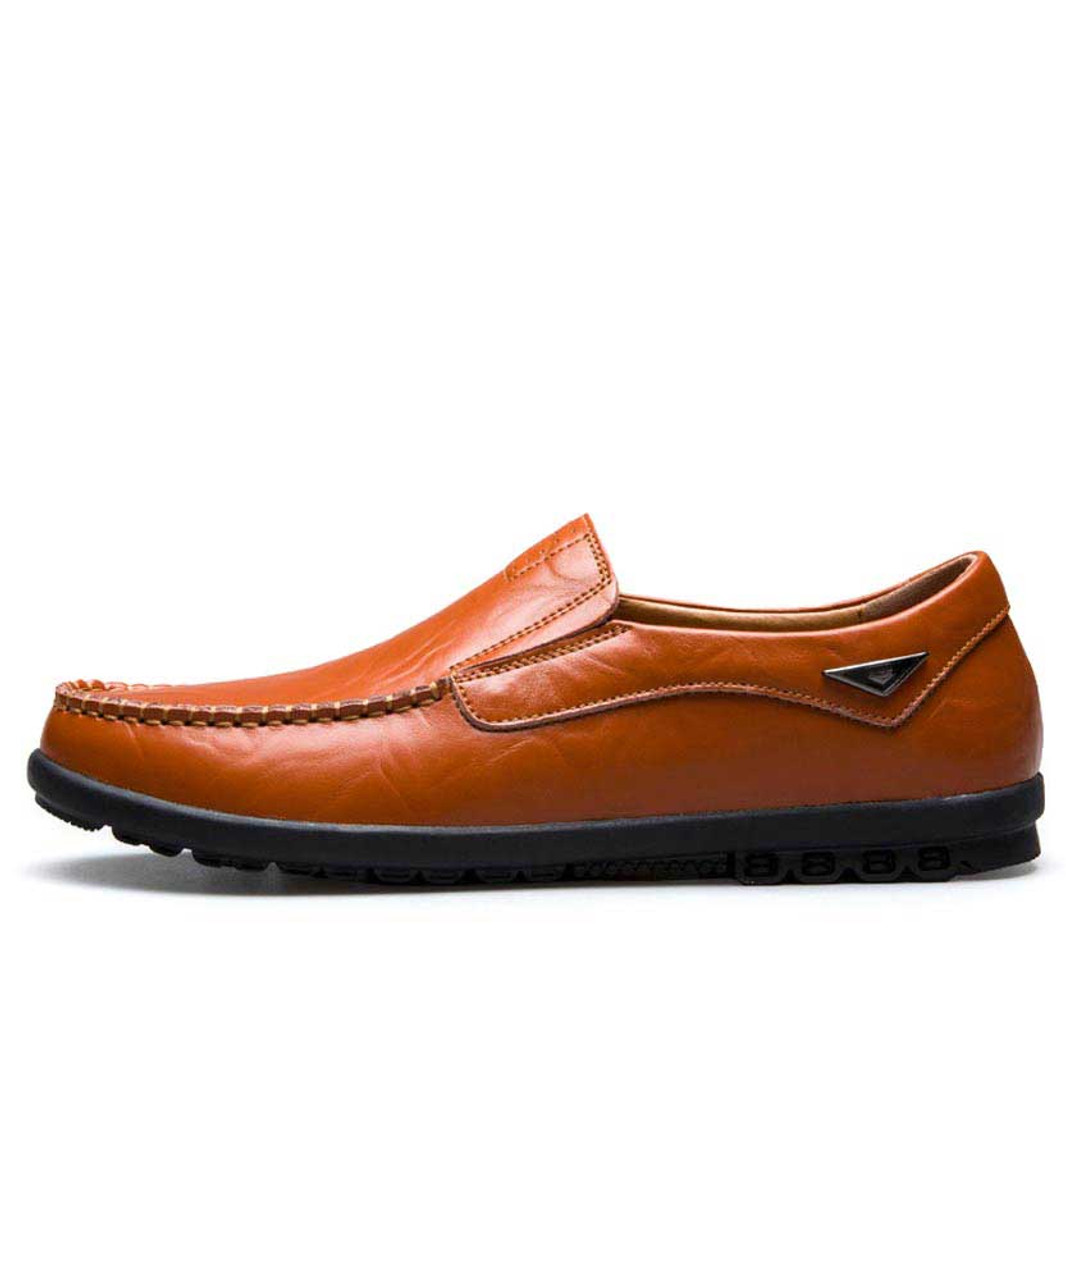 Red brown leather slip on shoe loafer with metal ornament | Mens shoe ...